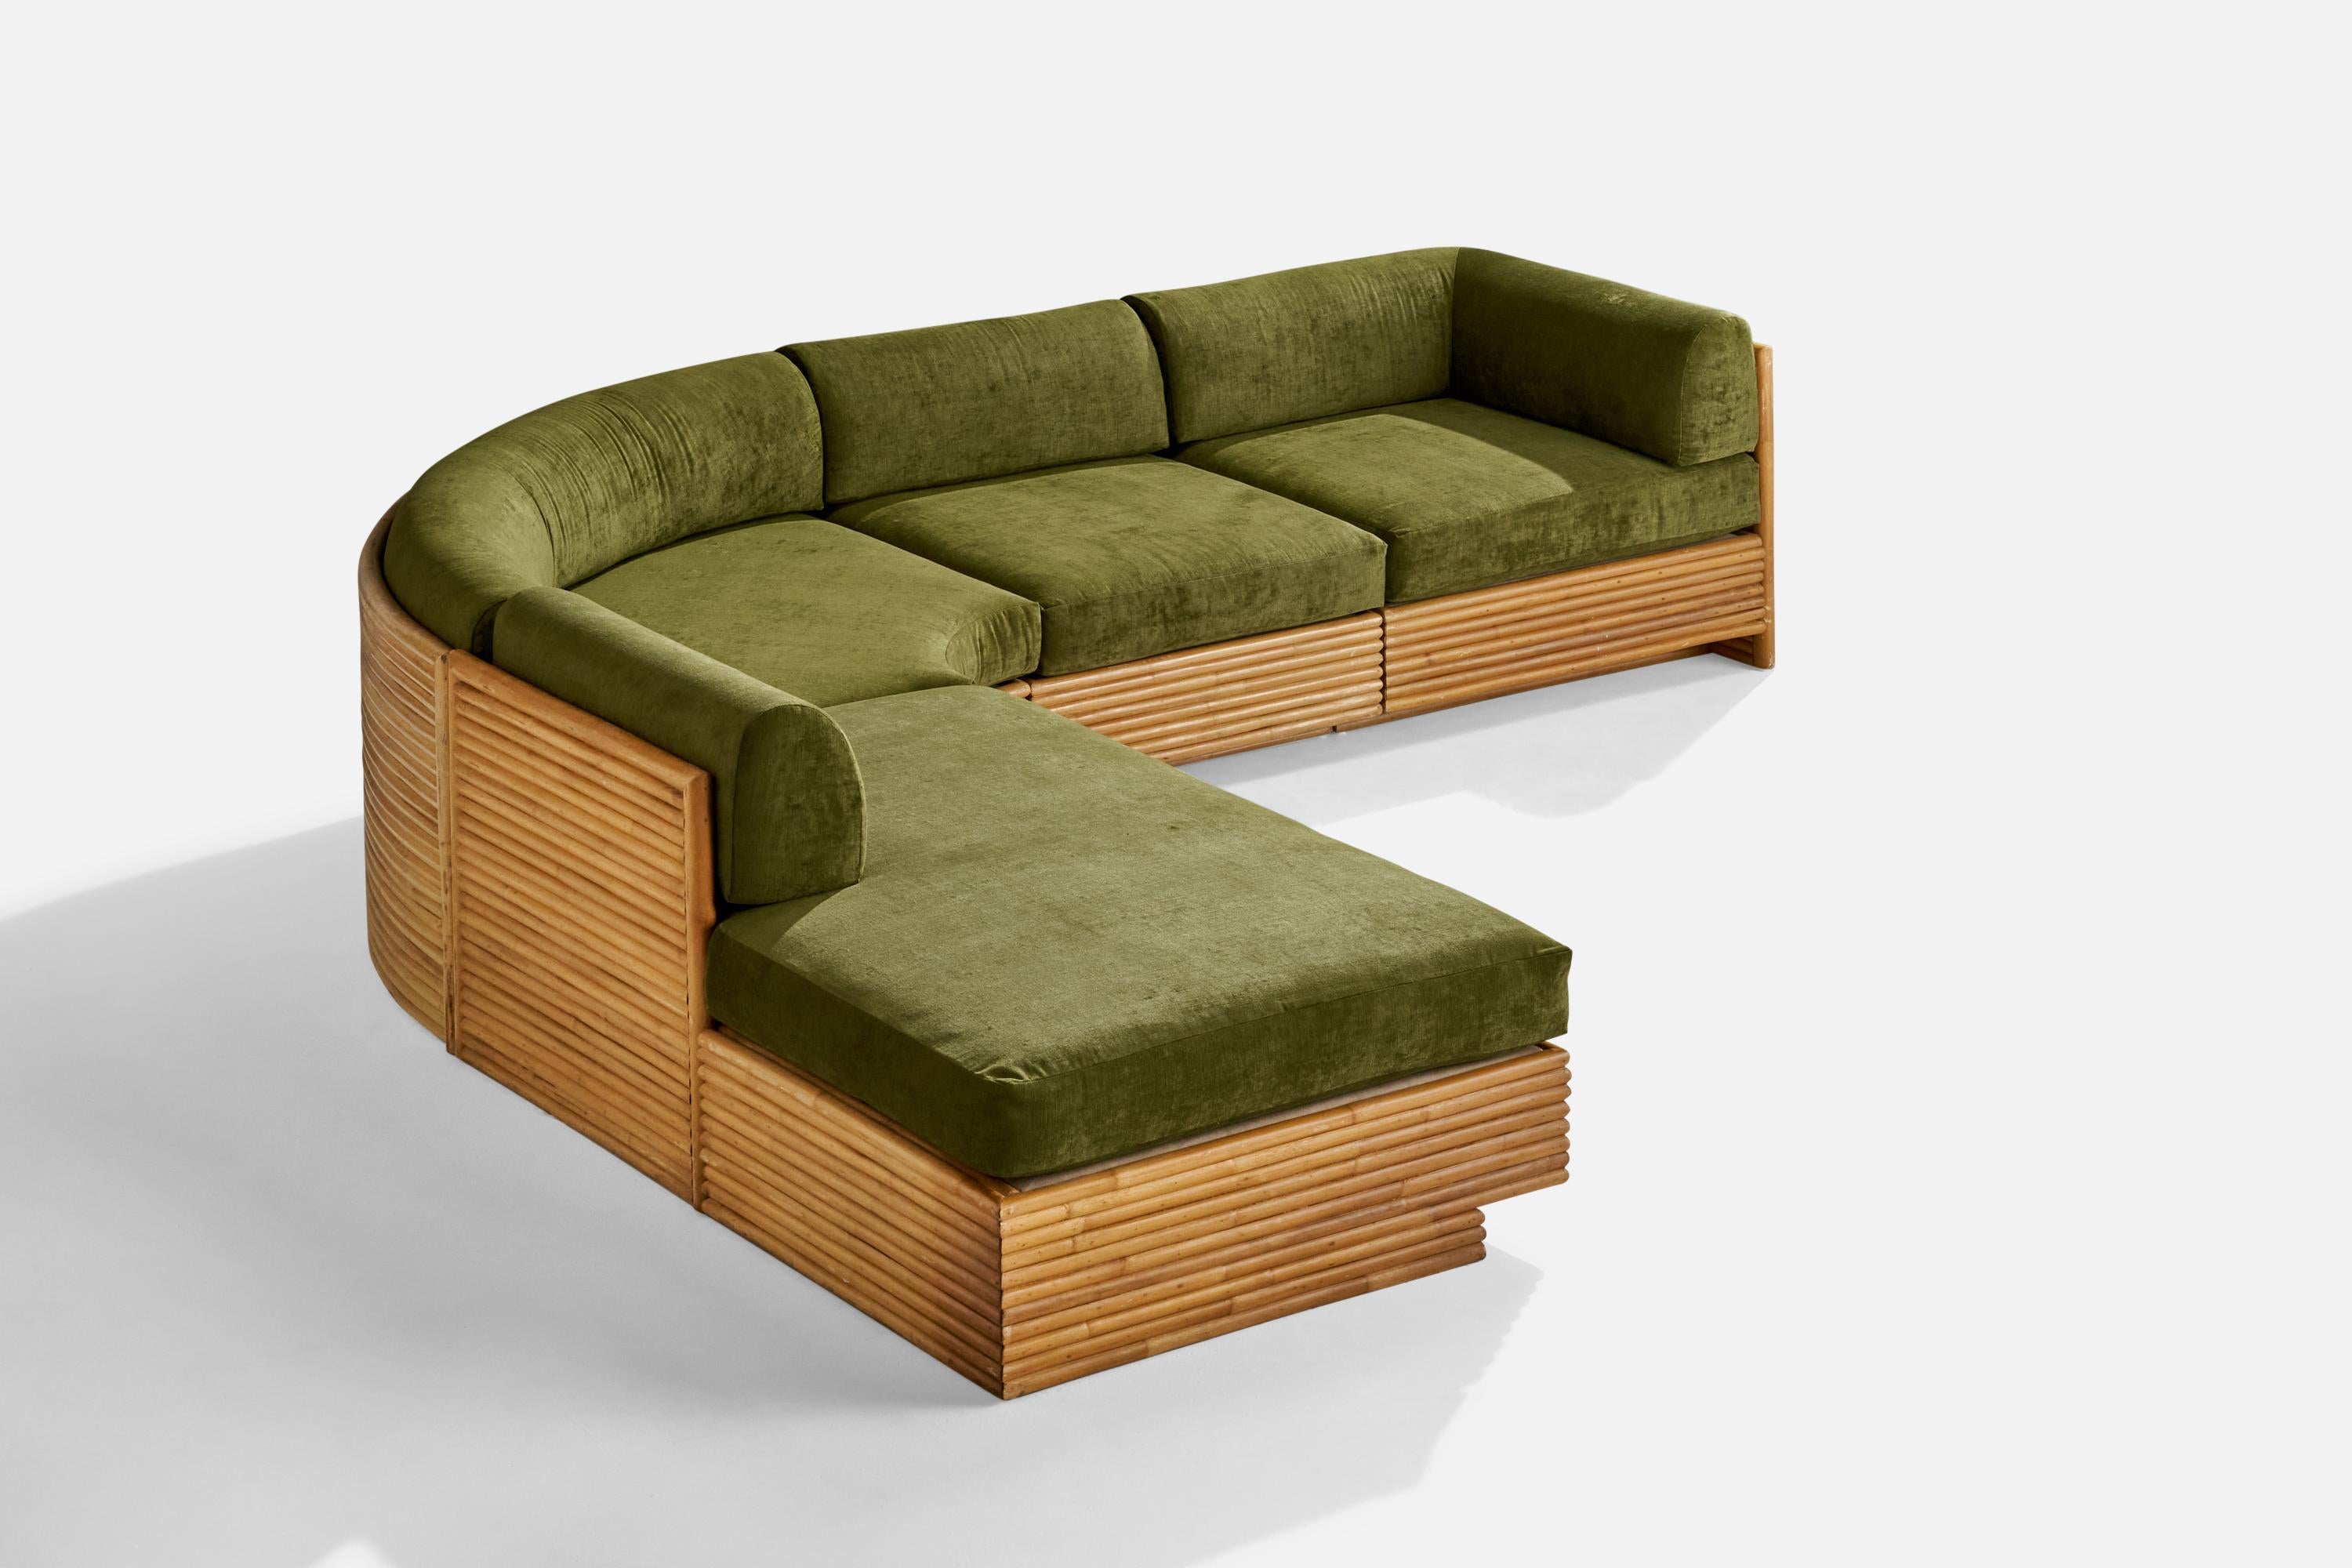 A bamboo and green velvet sectional sofa designed and produced by Directional Furniture, USA, 1970s.

Seat height 18”.